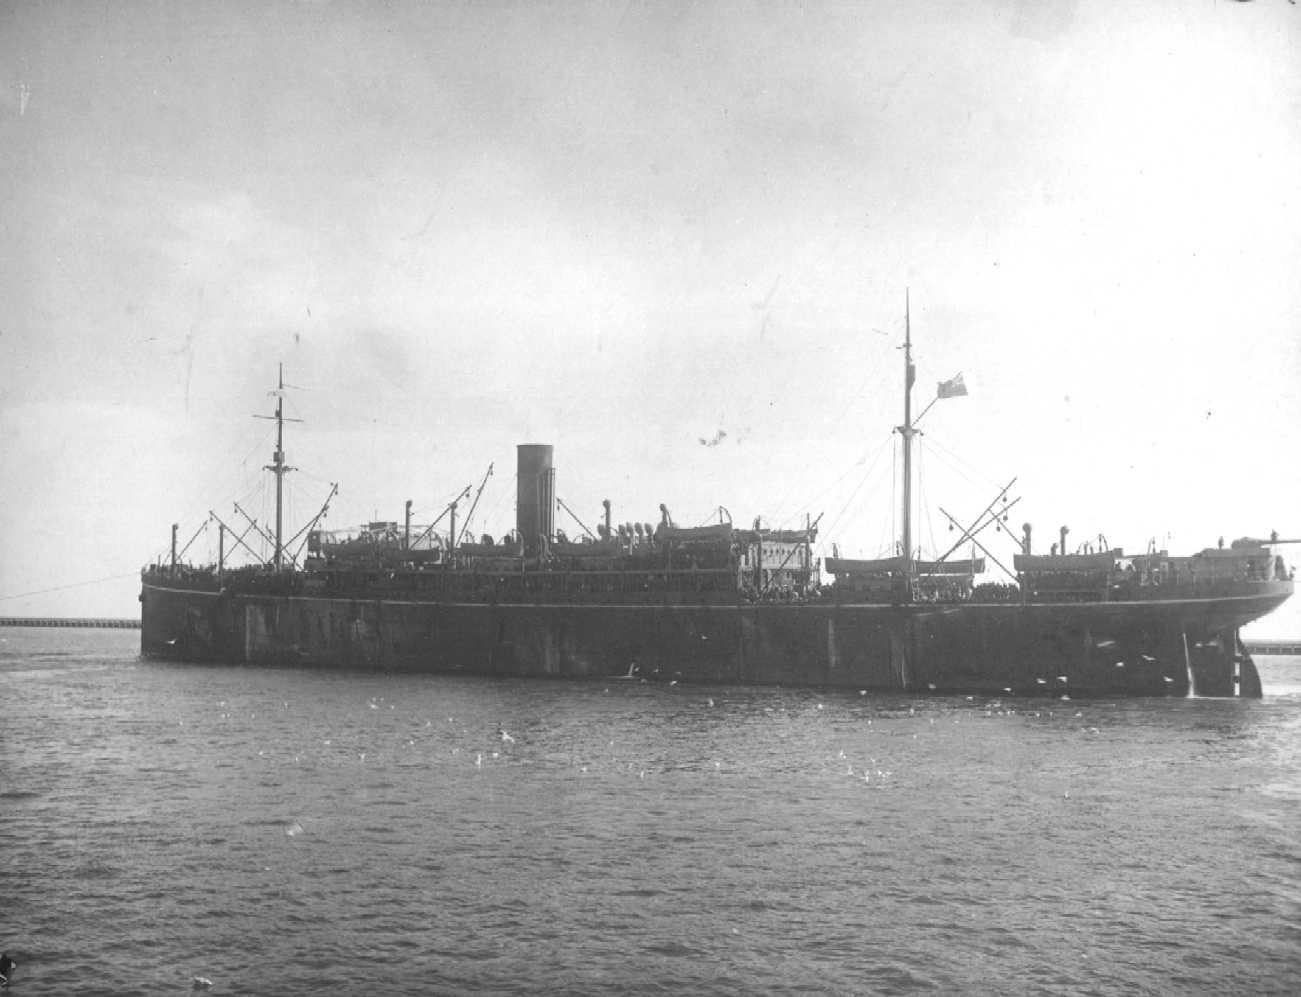 Passenger Vessel "S.S. Borda", built in 1914 at Greenock by Caird & Co for P&O Steam Navigation Co.  A Steel twin screw steamer of 1200nhp.
Tonnage:  11136 gross, 7036 net
Official Number:  135340
Dimensions:  length 500', breadth 62', draught 38'
Por